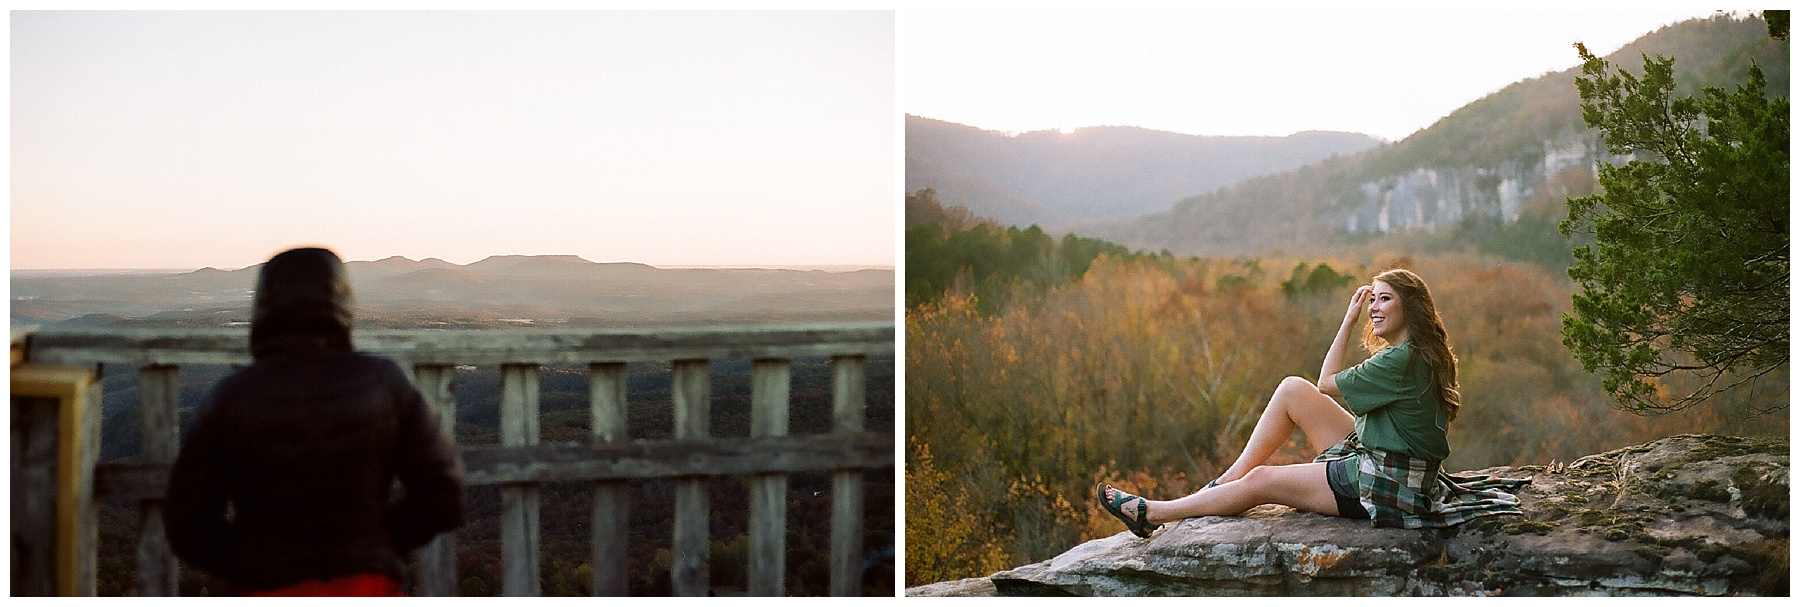 Film Review: Portra 400 — Jake Horn Photography